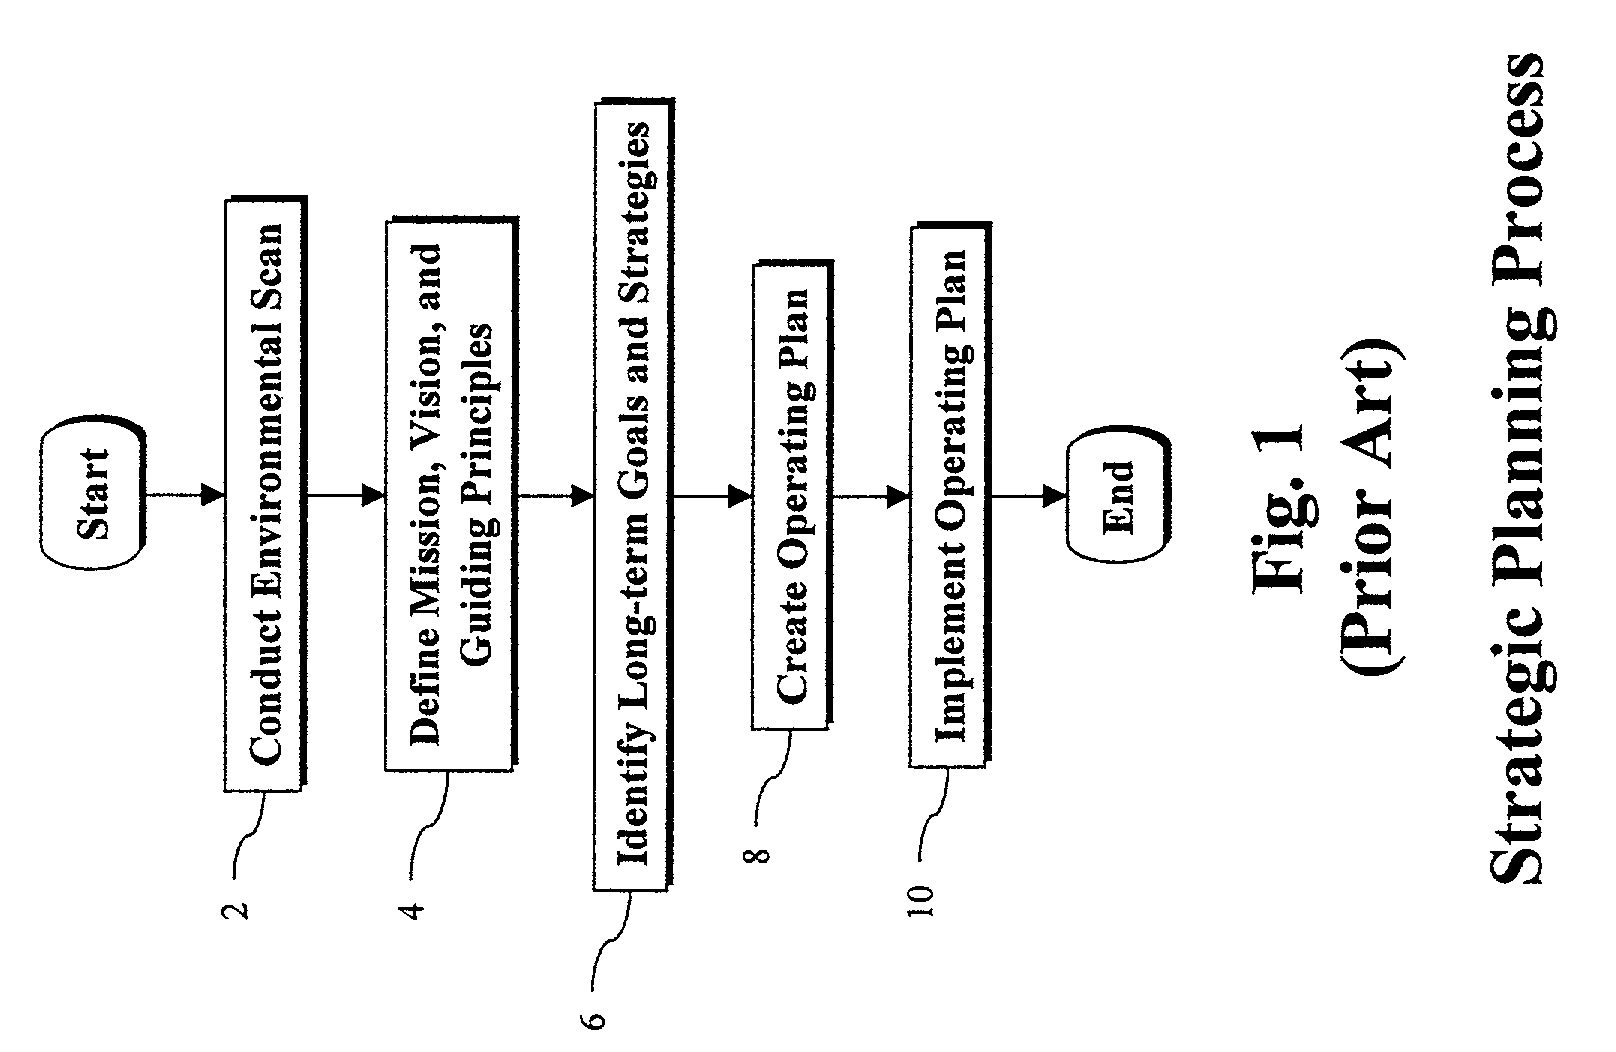 Method for developing an enterprise alignment framework hierarchy by compiling and relating sets of strategic business elements